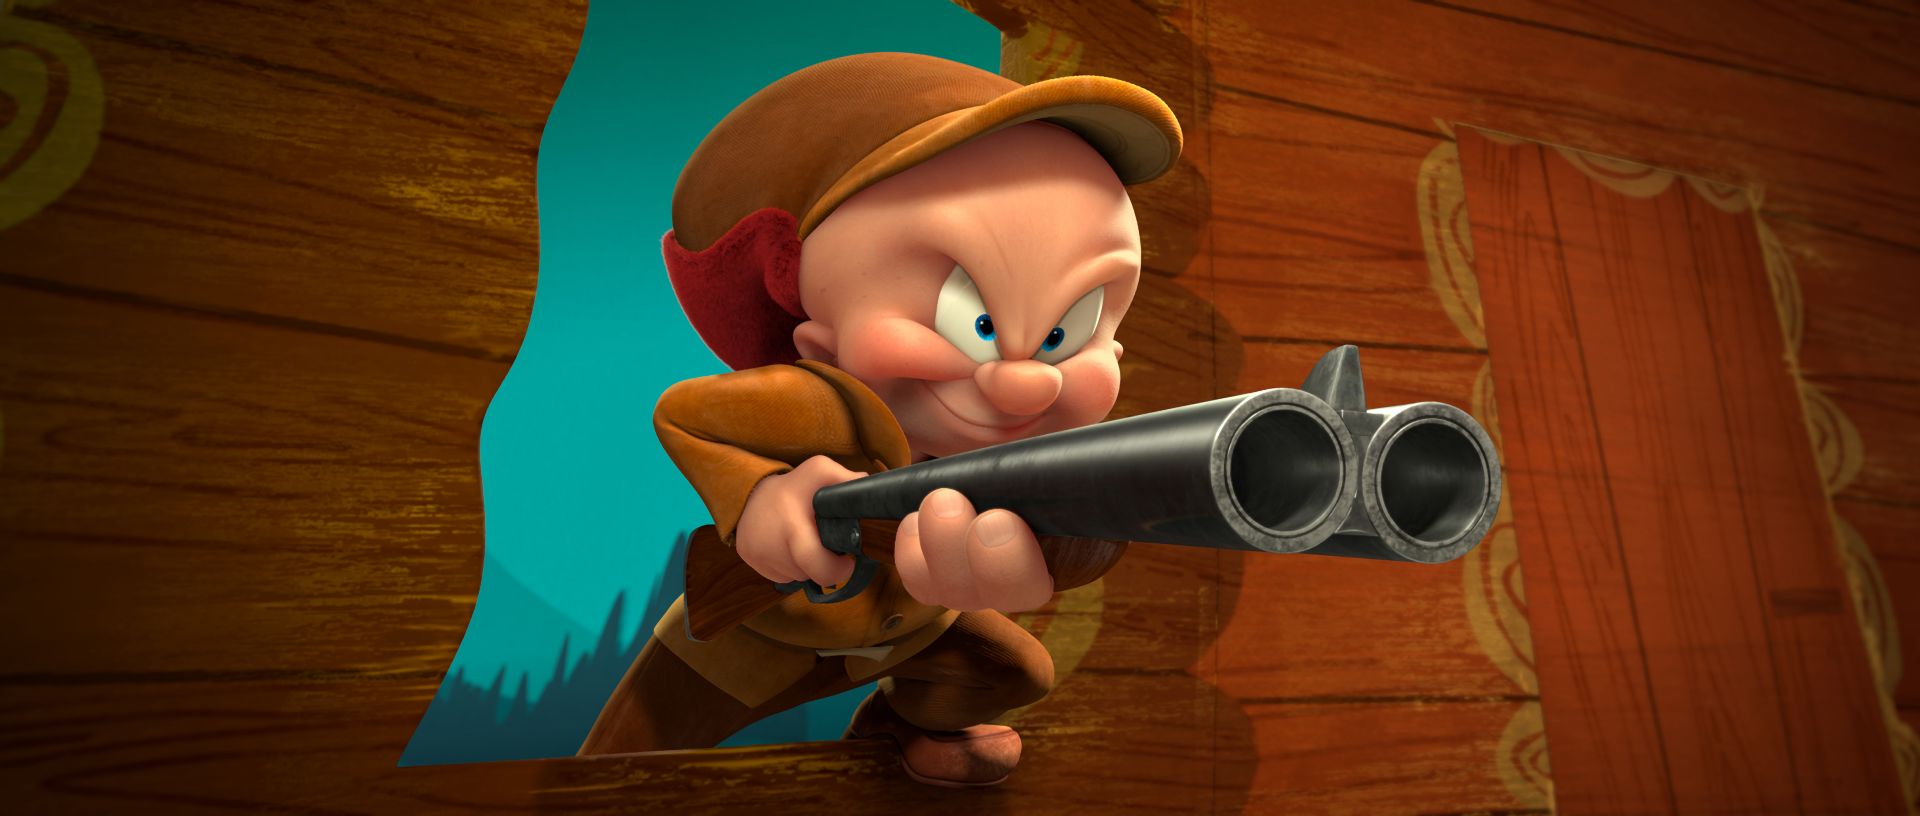 picture of elmer fudd with gun